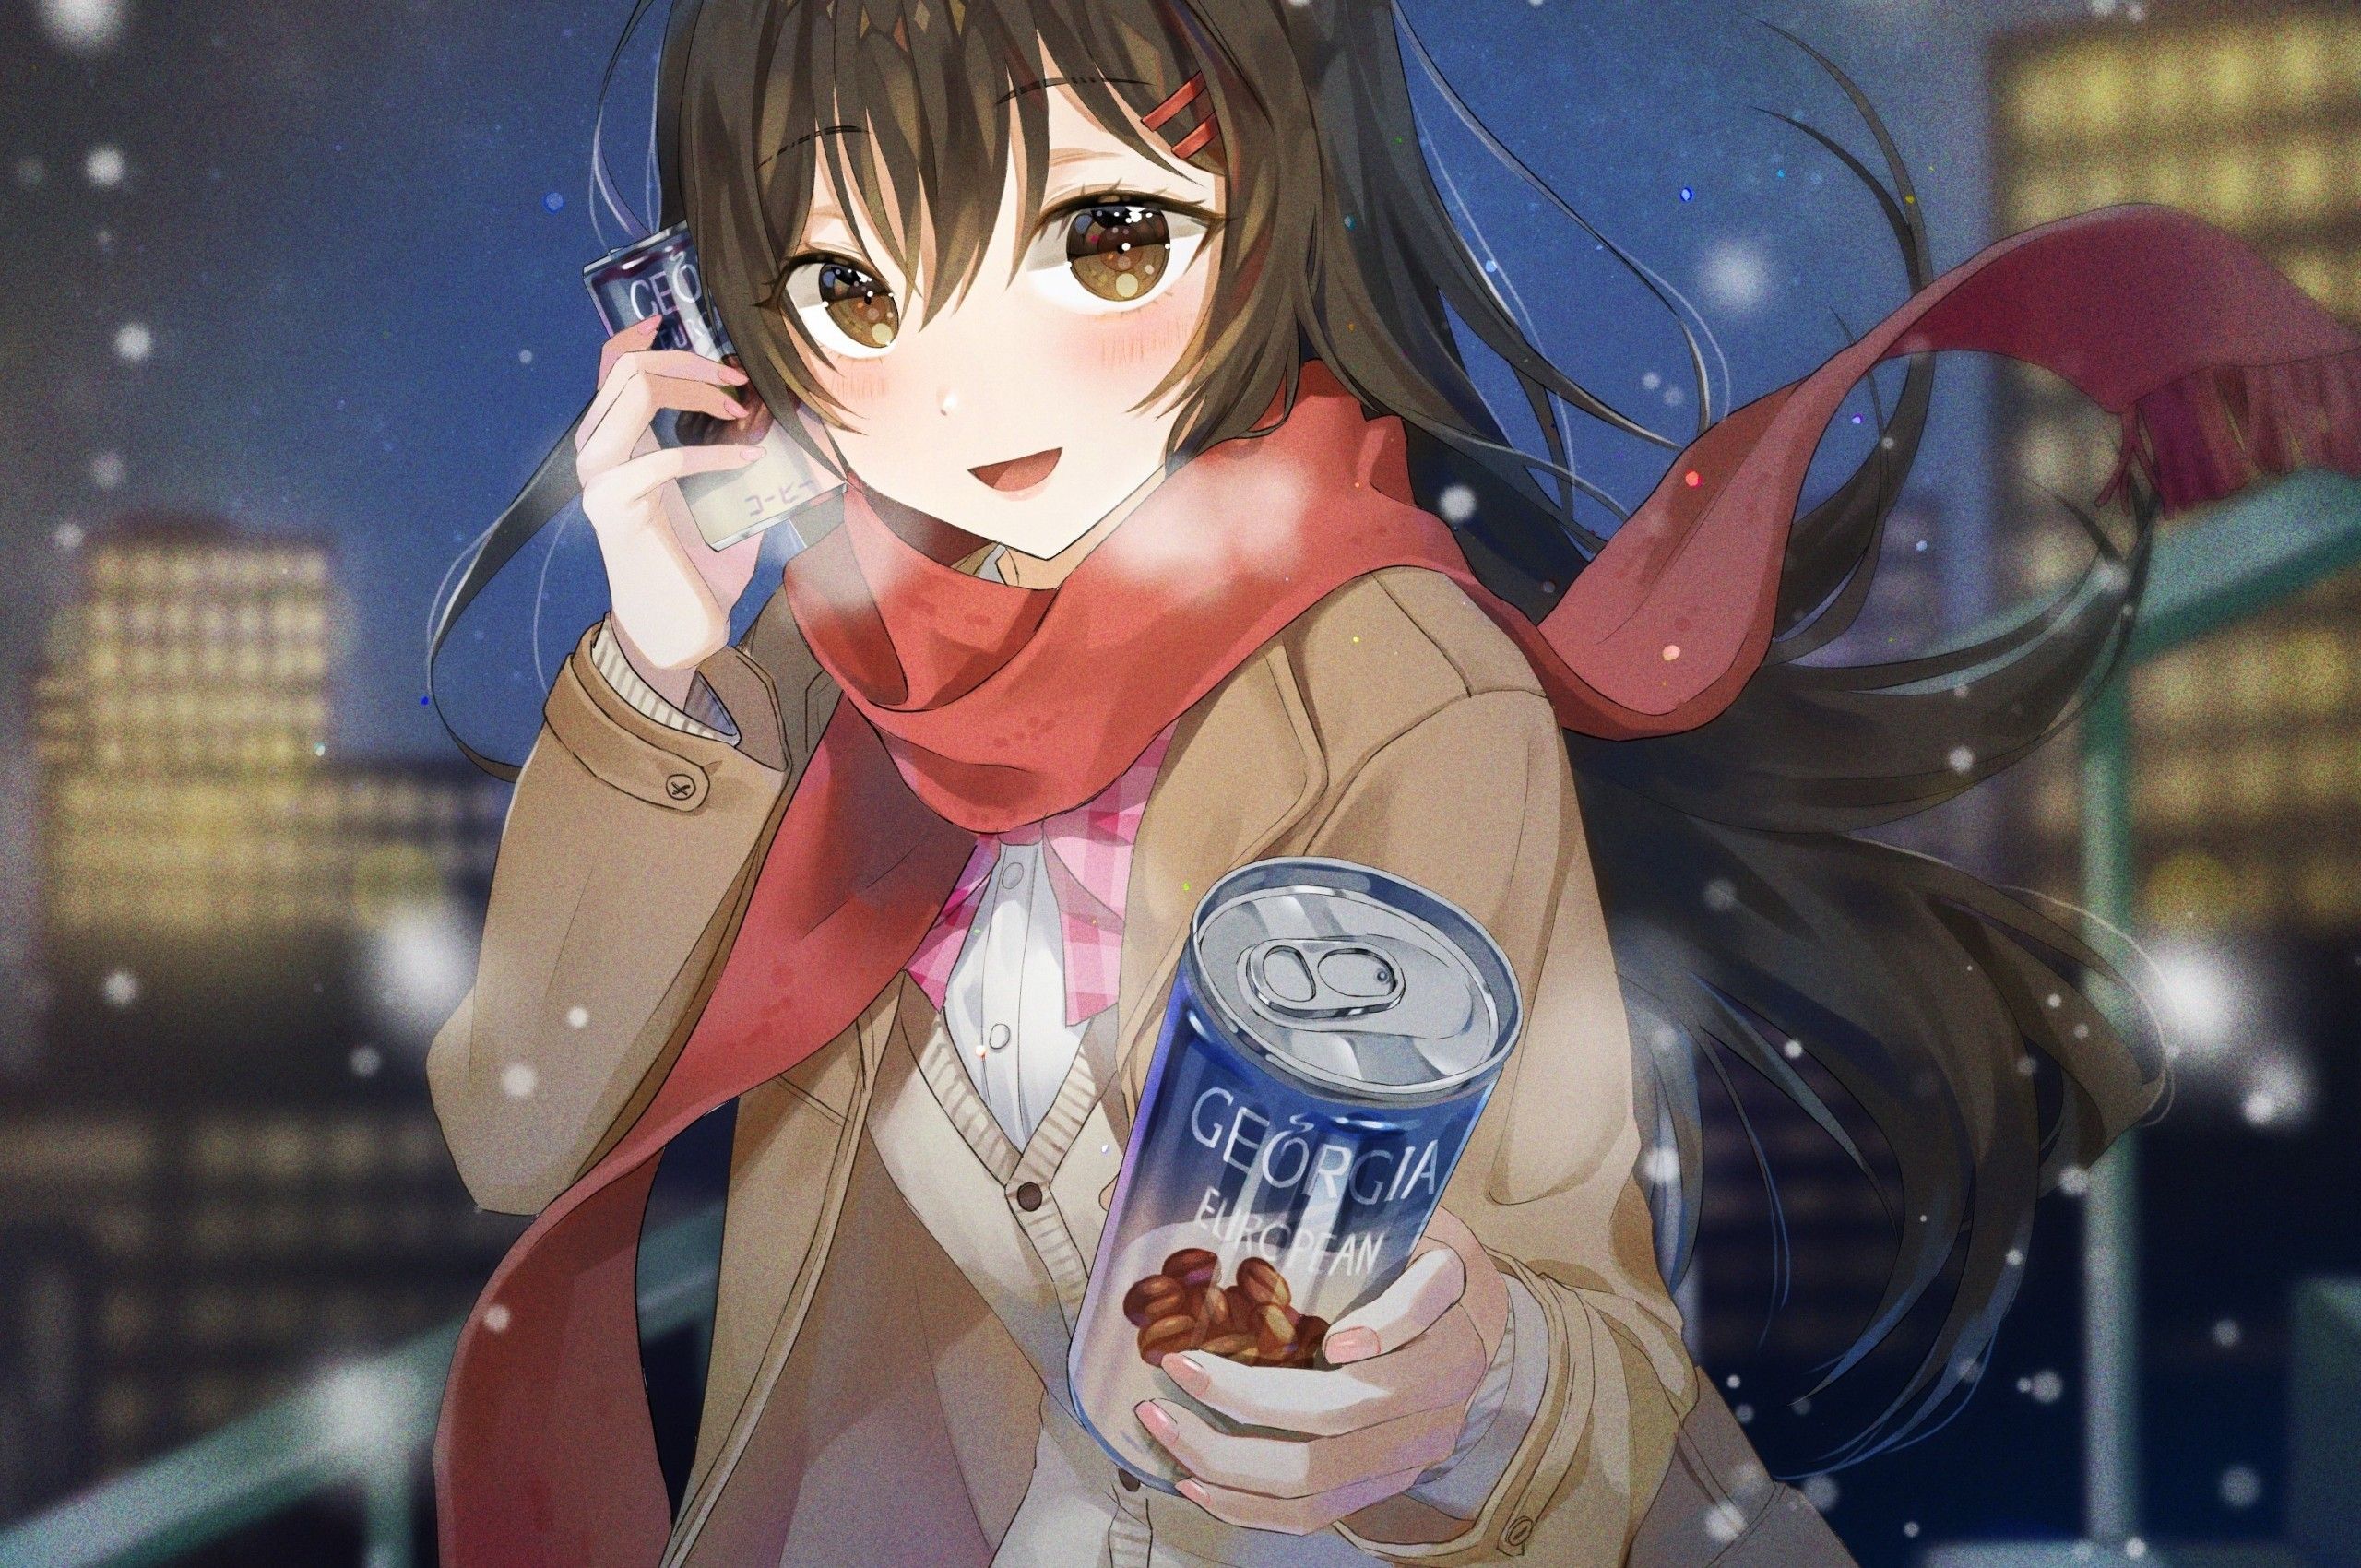 Download 2560x1700 Anime School Girl, Coffee, Cold, Winter, Black Hair, Red Scarf Wallpaper for Chromebook Pixel